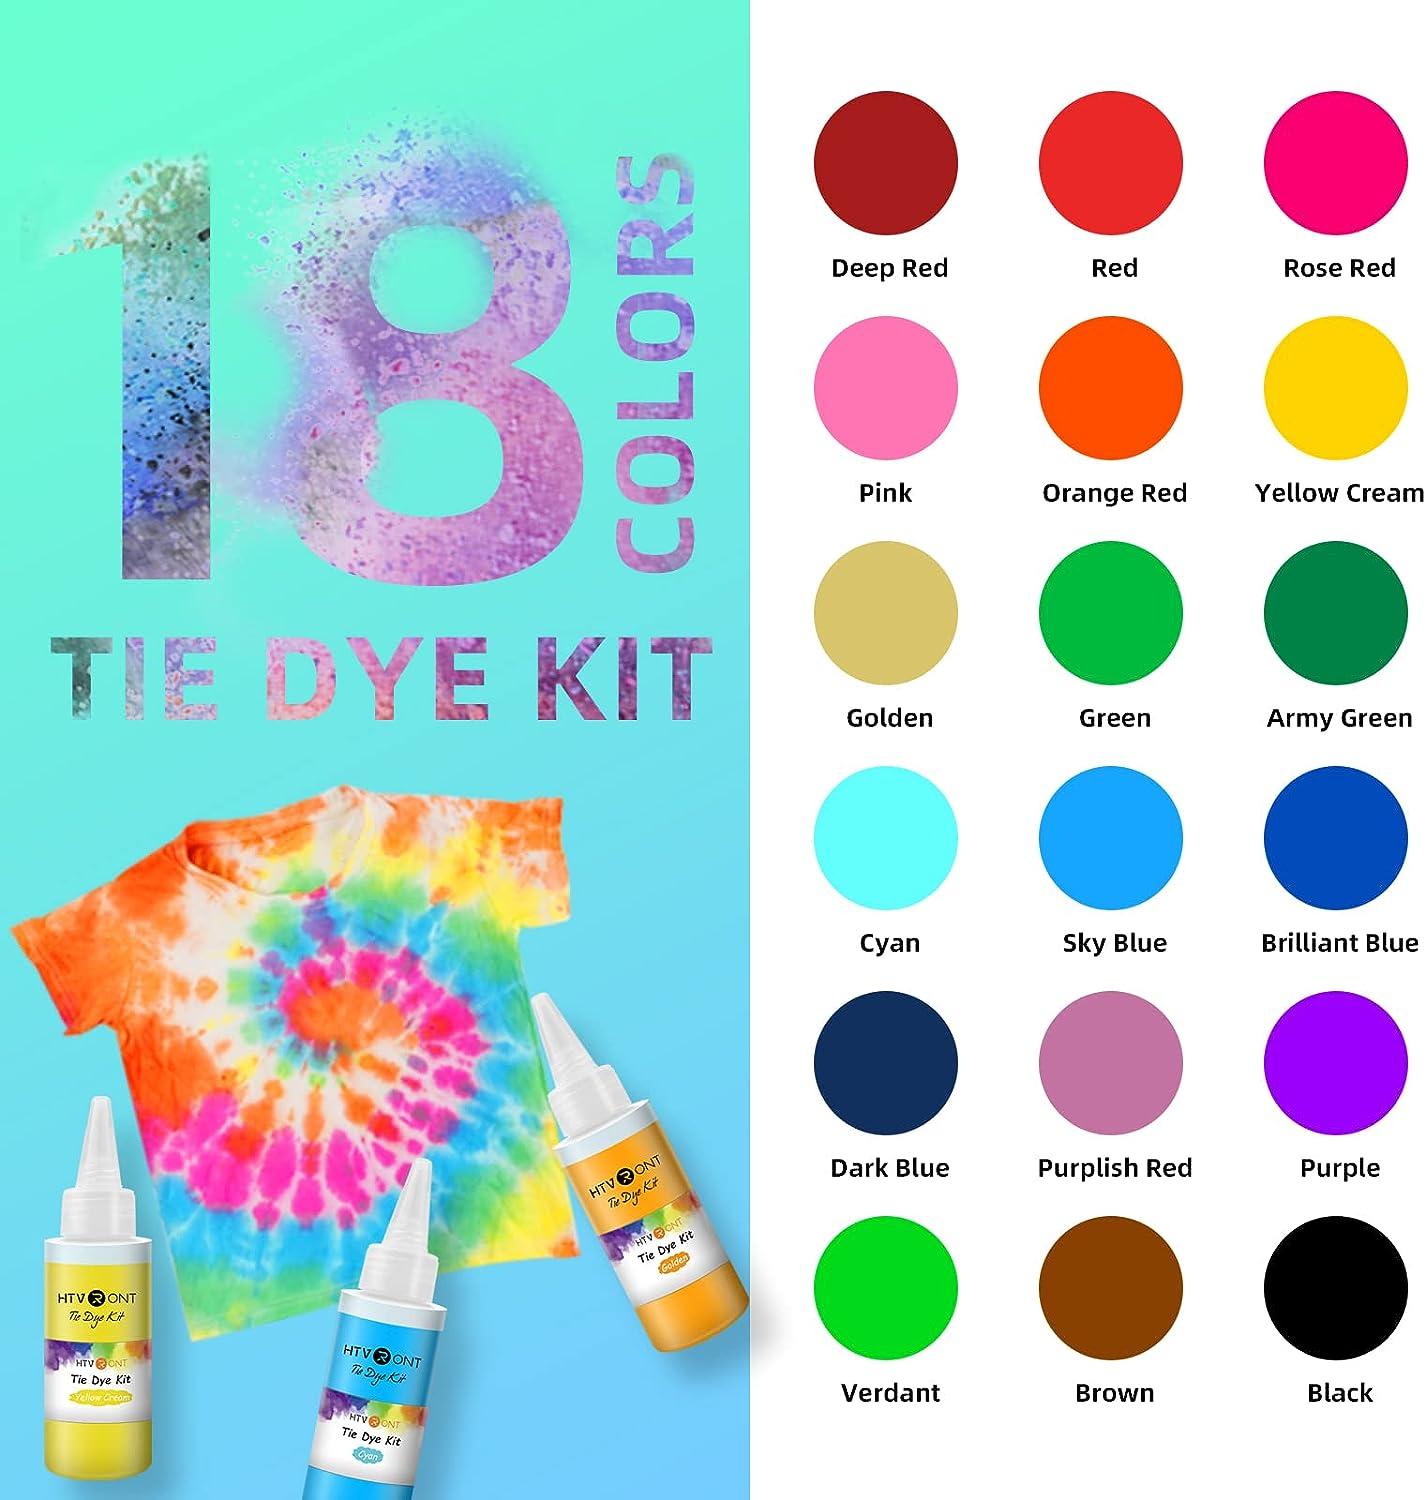  HTVRONT Tie Dye Kit for Kids and Adults - 18 Colors 80ML  Pre-Filled Bottles Permanent Non-Toxic Tye Dye Kits for Clothing T-Shirt  Fabric Textile Craft Party Handmade Project(Just Add Water)